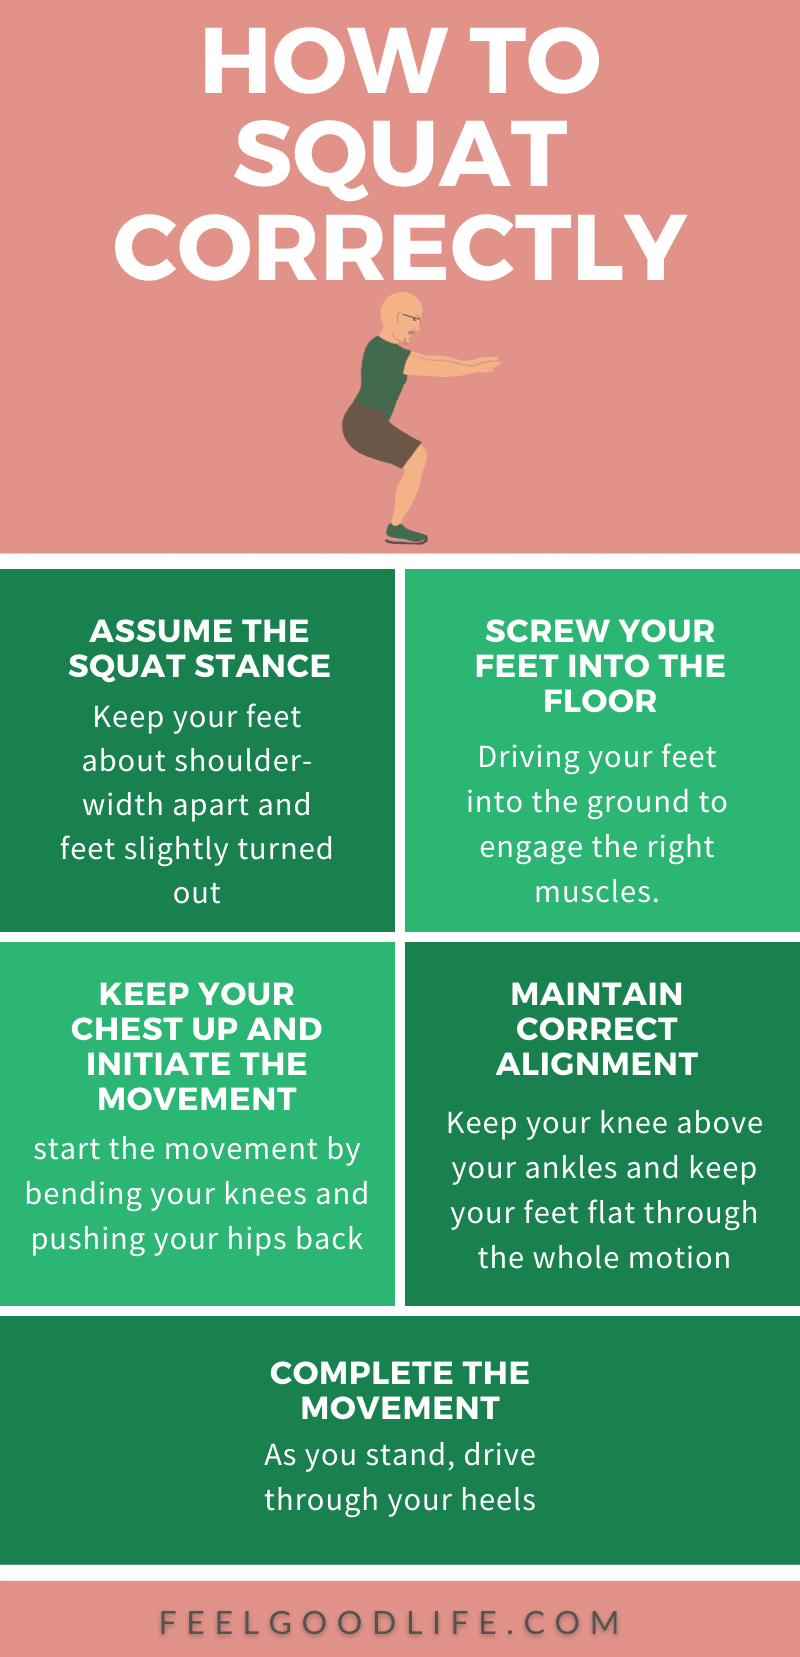 How to squat correctly guide provided by coach todd with feel good life.